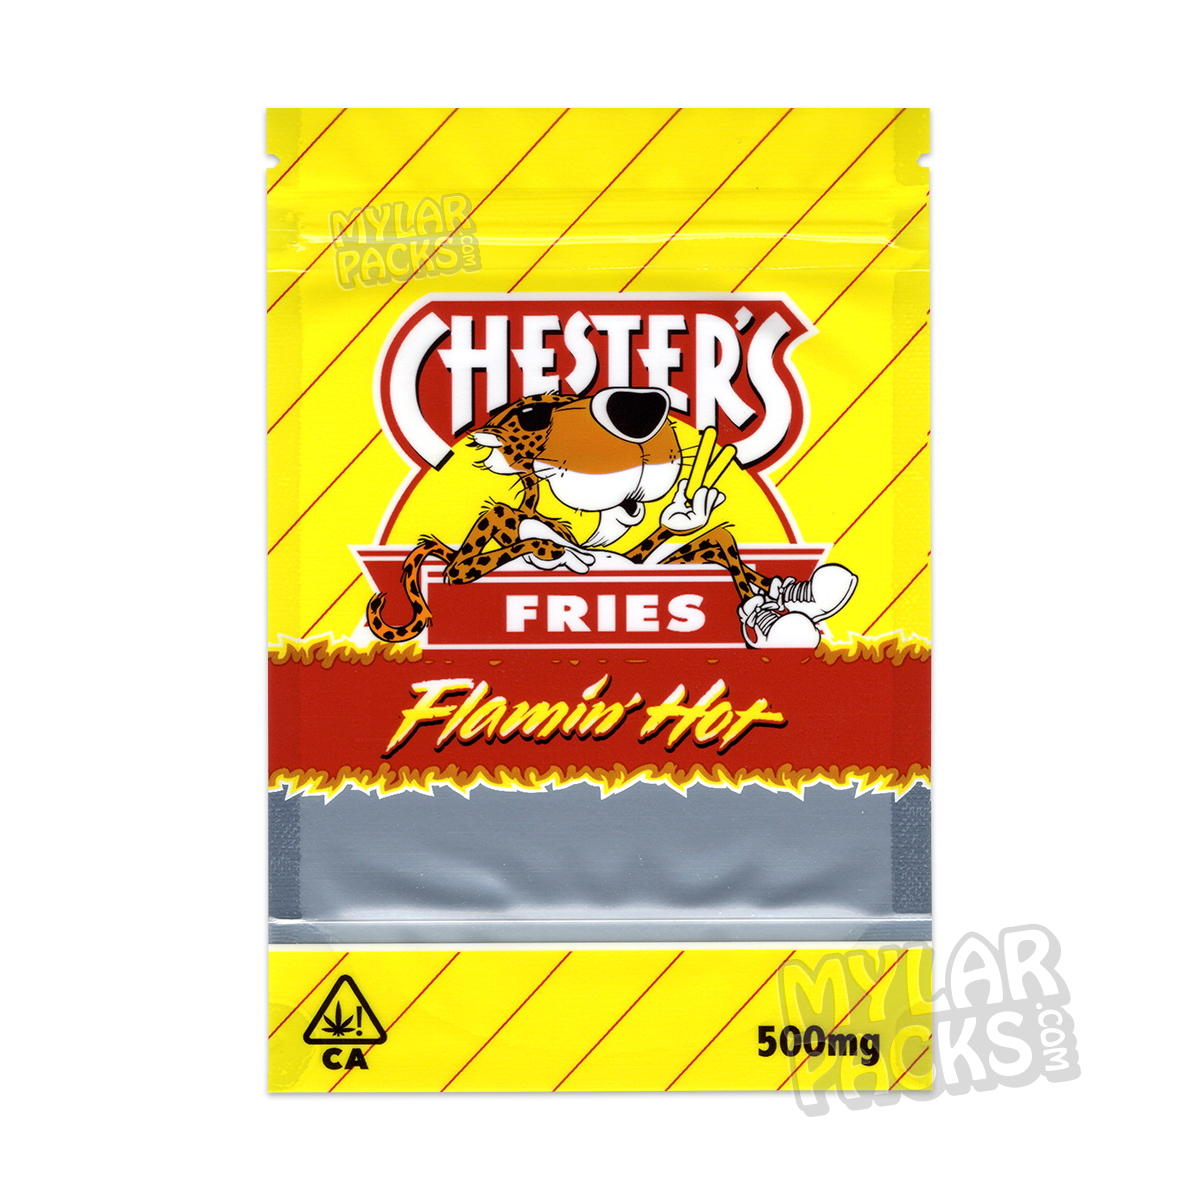 Chesterrz Flamin' Hot Fries 500mg Empty Chips Edibles Mylar Bag